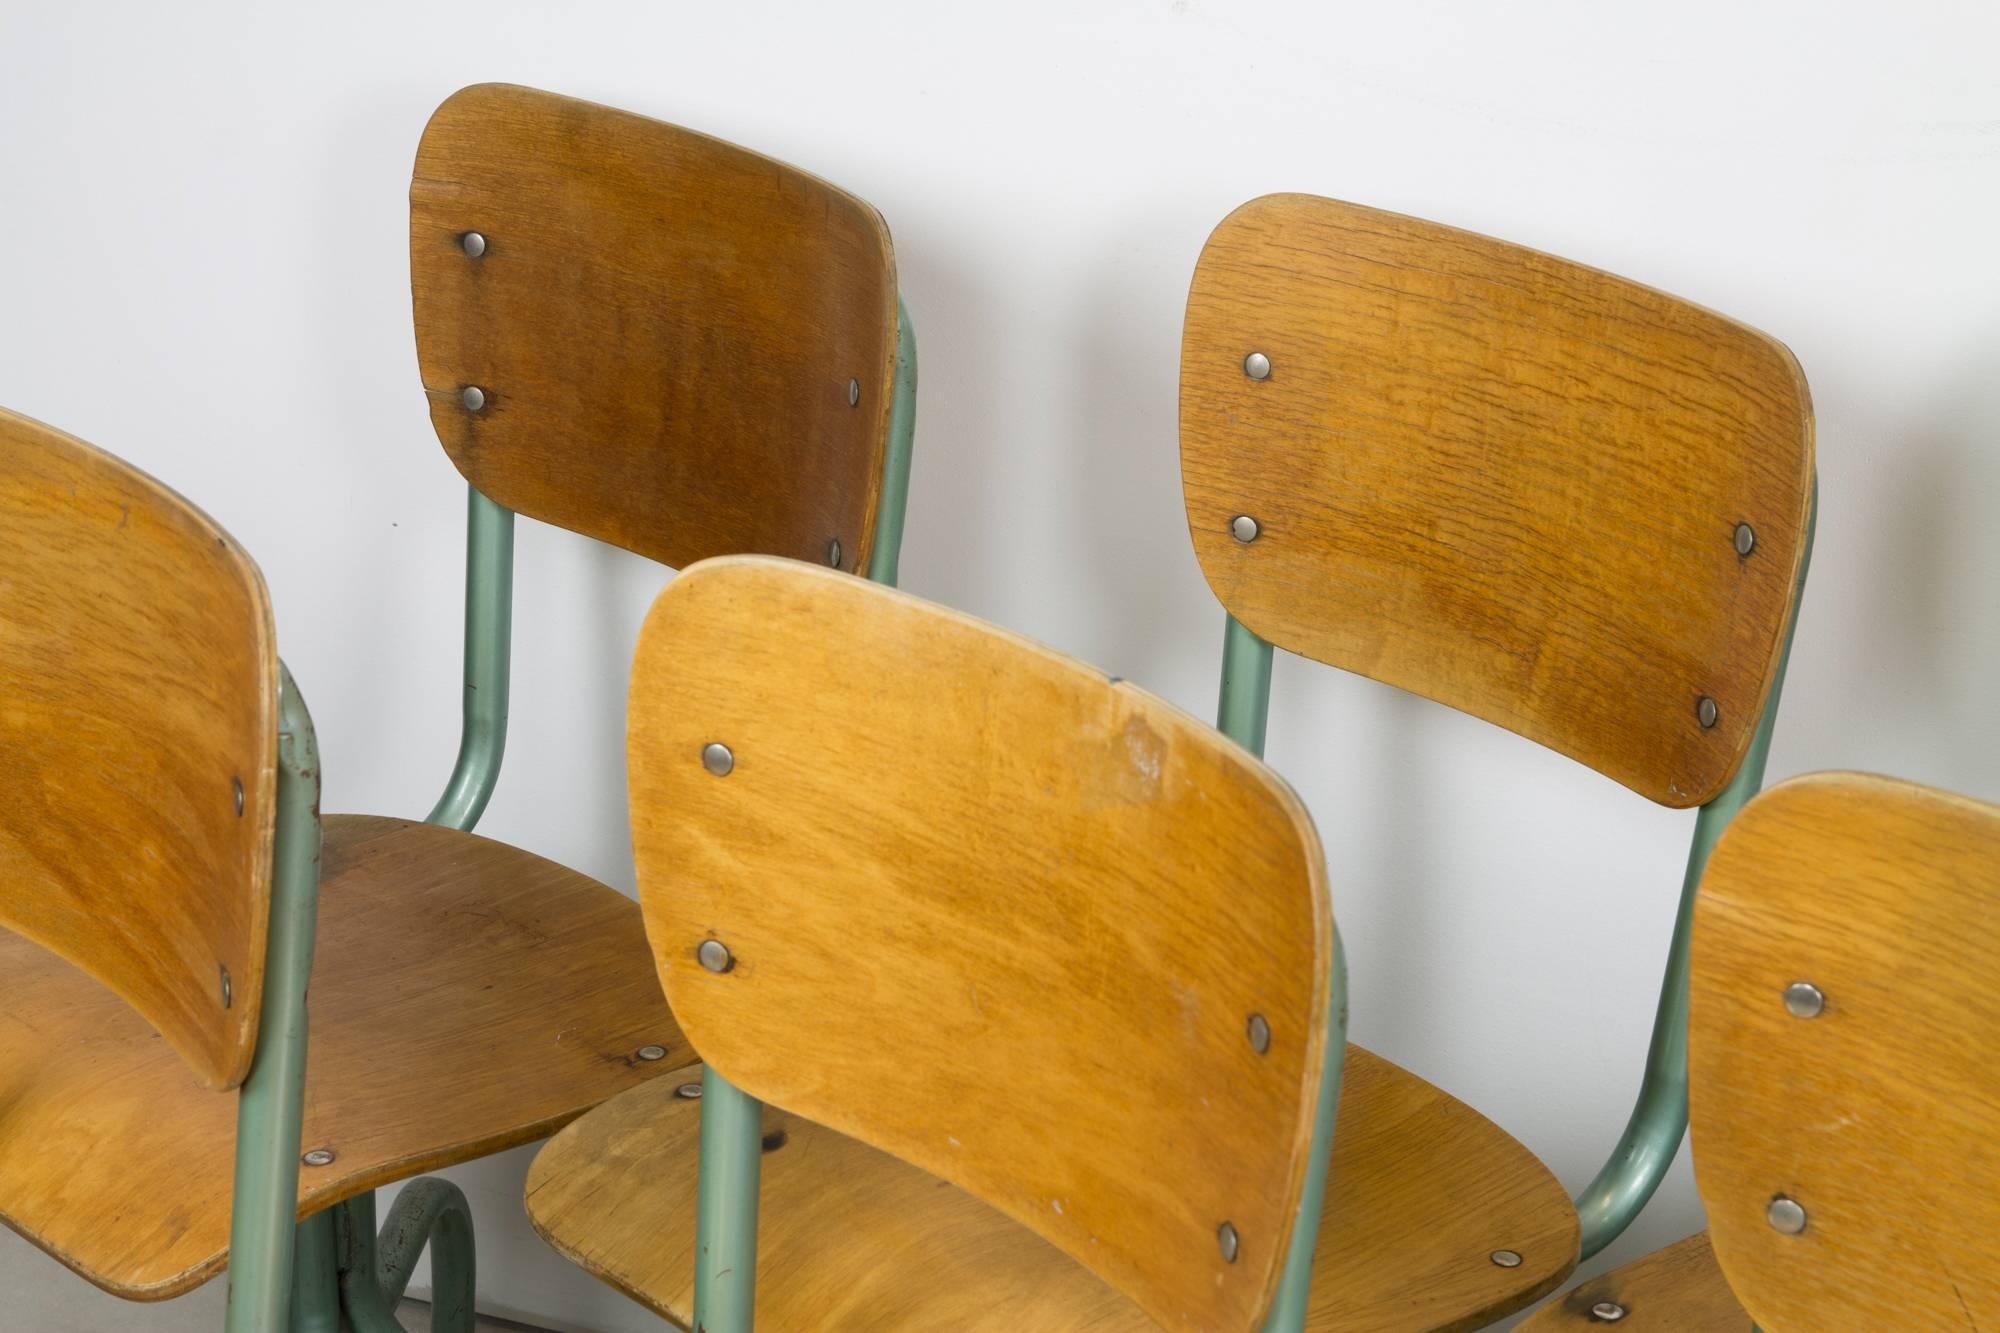 A set of eight Industrial school chairs featuring molded plywood seats and backrests, with teal coated tubular steel legs on casters.